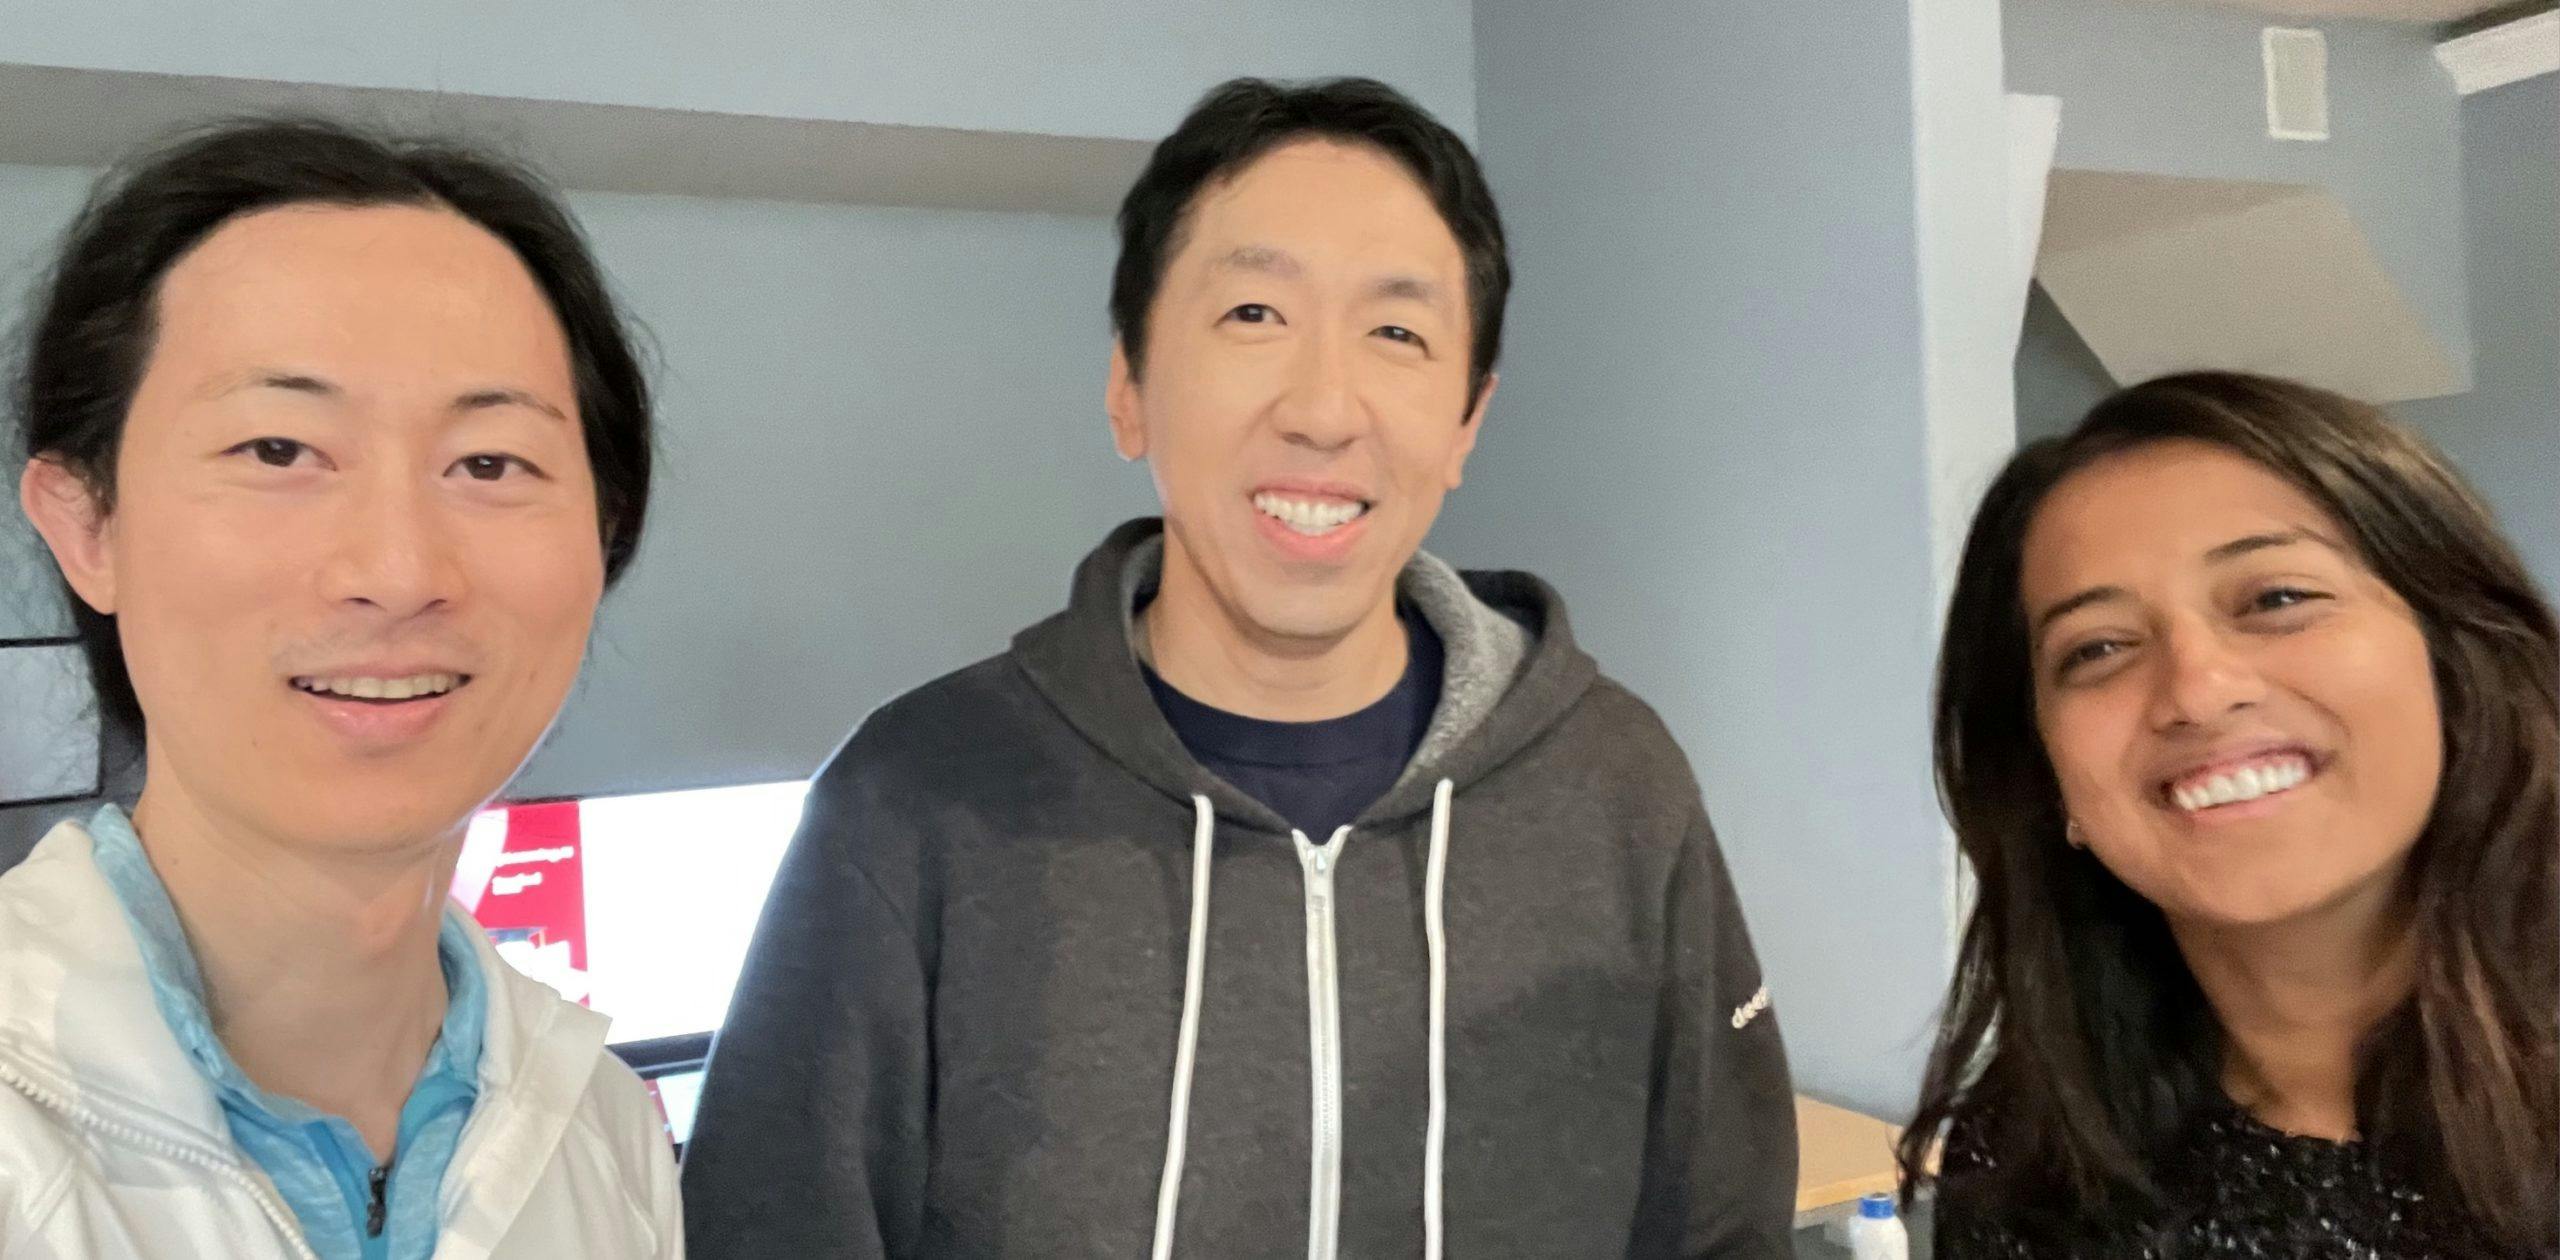 Eddy Shyu, Andrew Ng, and Aarti Bagul, who were part of the core team behind the new Machine Learning Specialization from DeepLearning.AI.